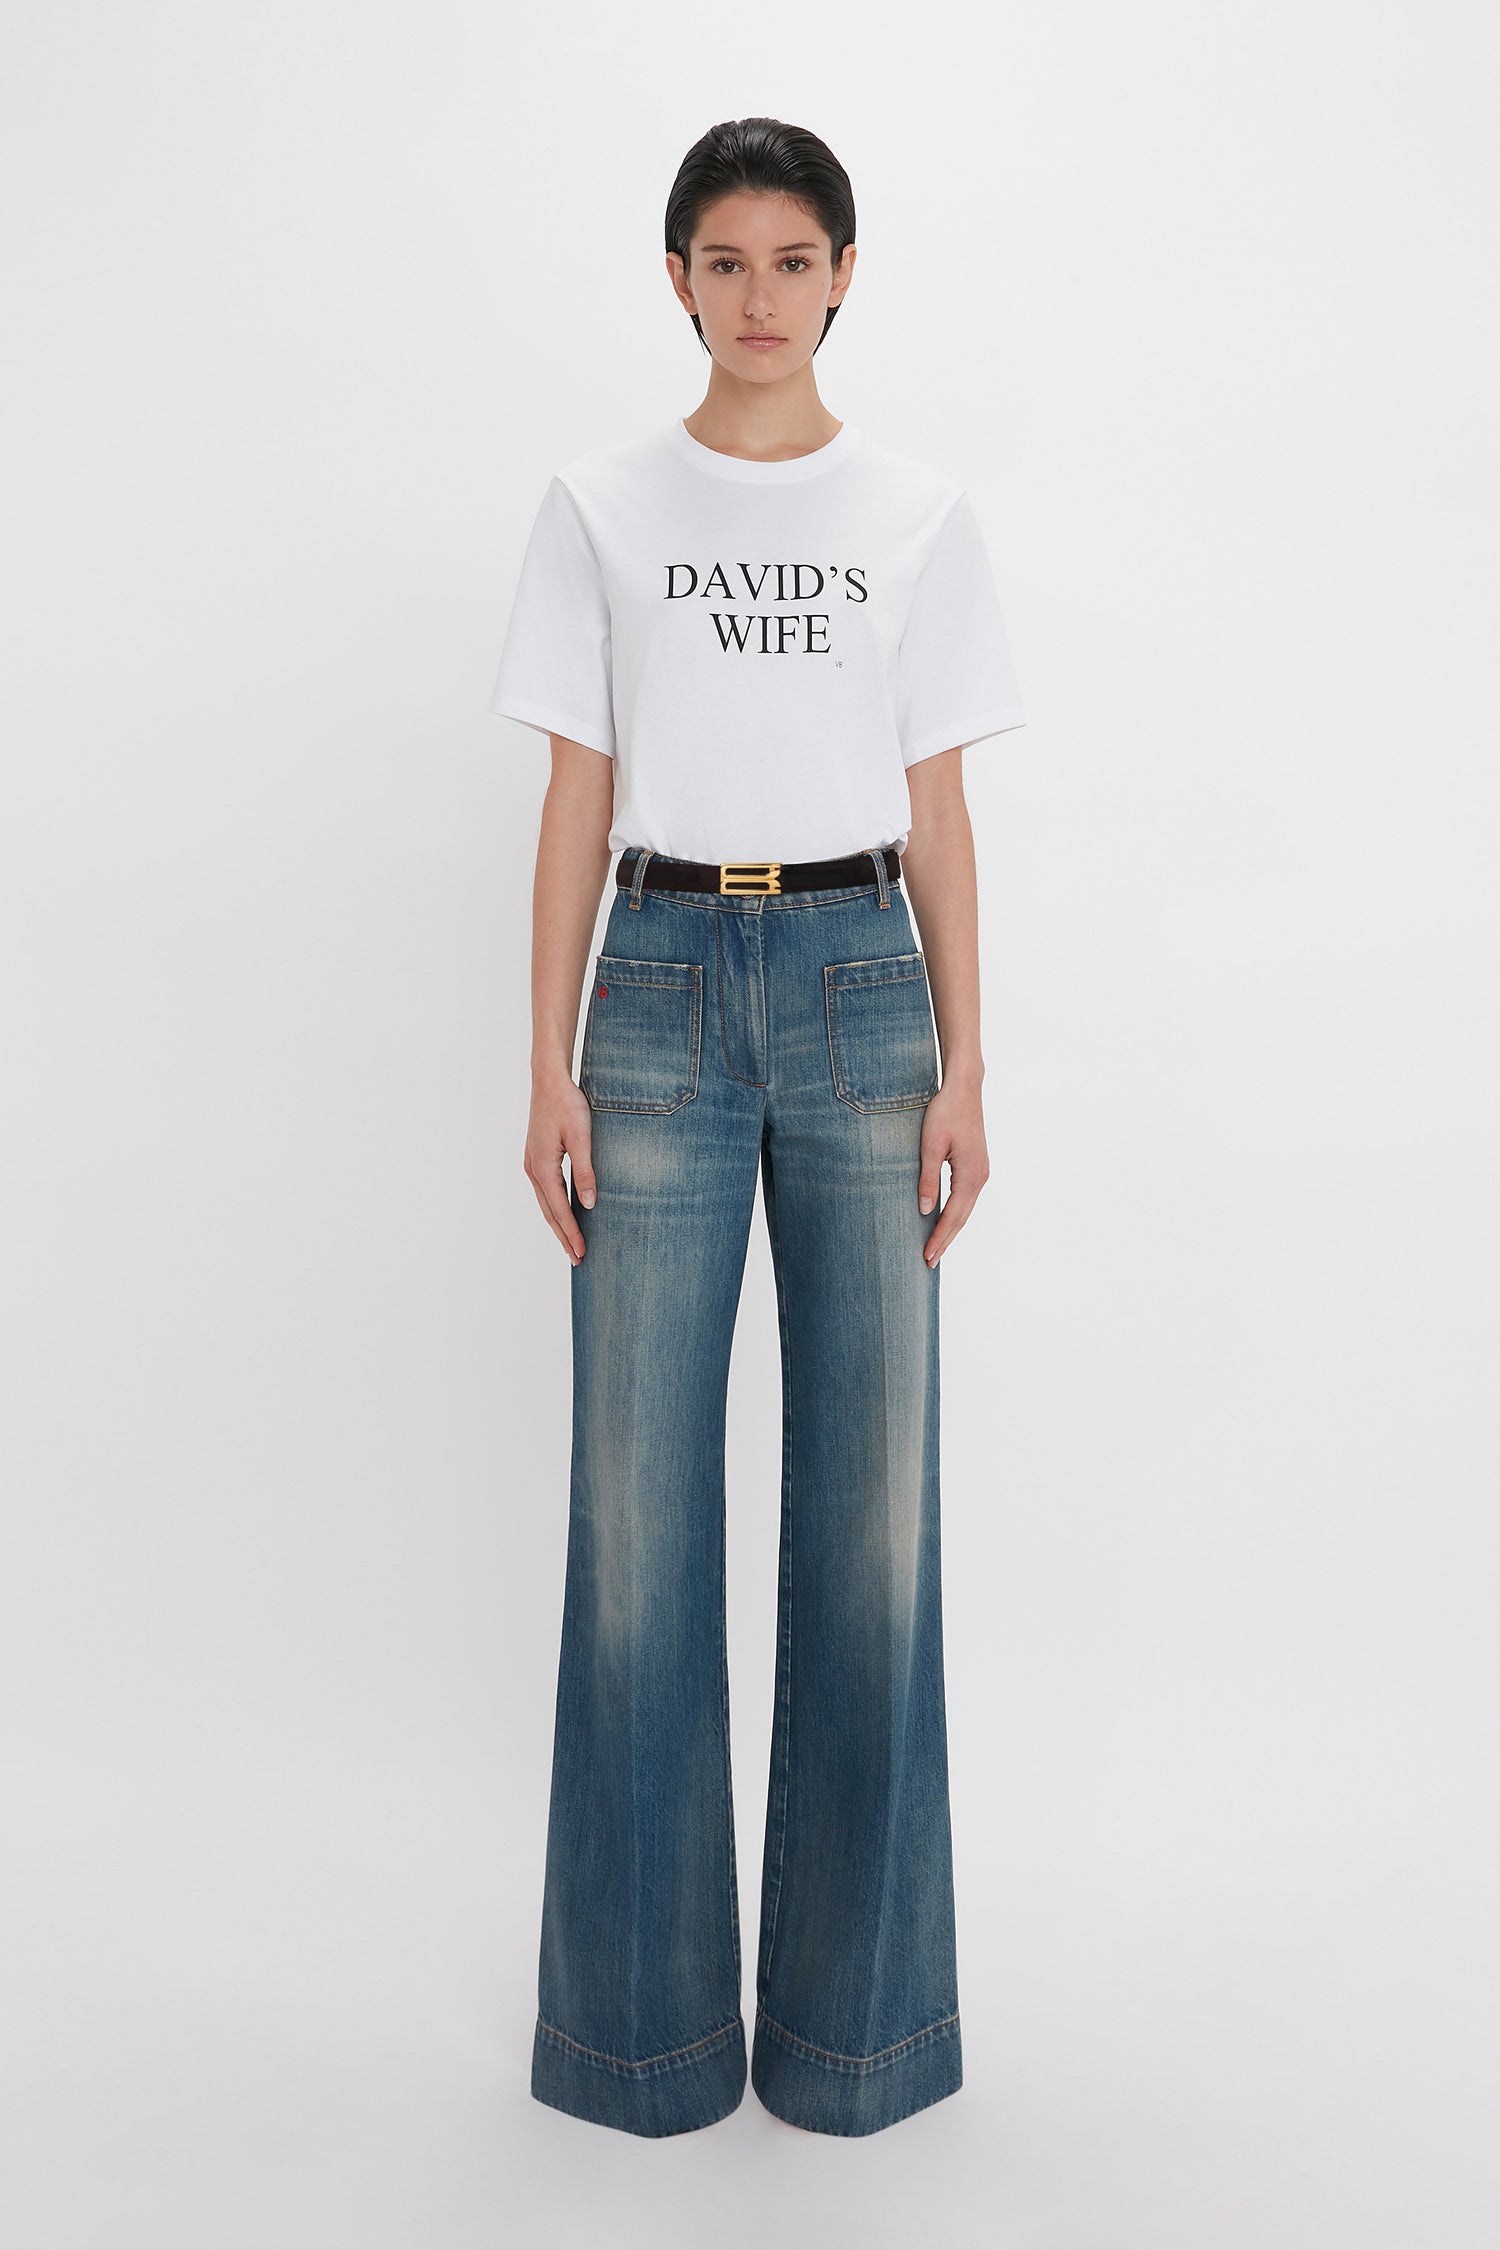 A woman wearing a white t-shirt with "david's wife" text and high-waisted Alina Jean In Indigrey Wash jeans by Victoria Beckham, accessorized with a black belt with a gold buckle, standing against a